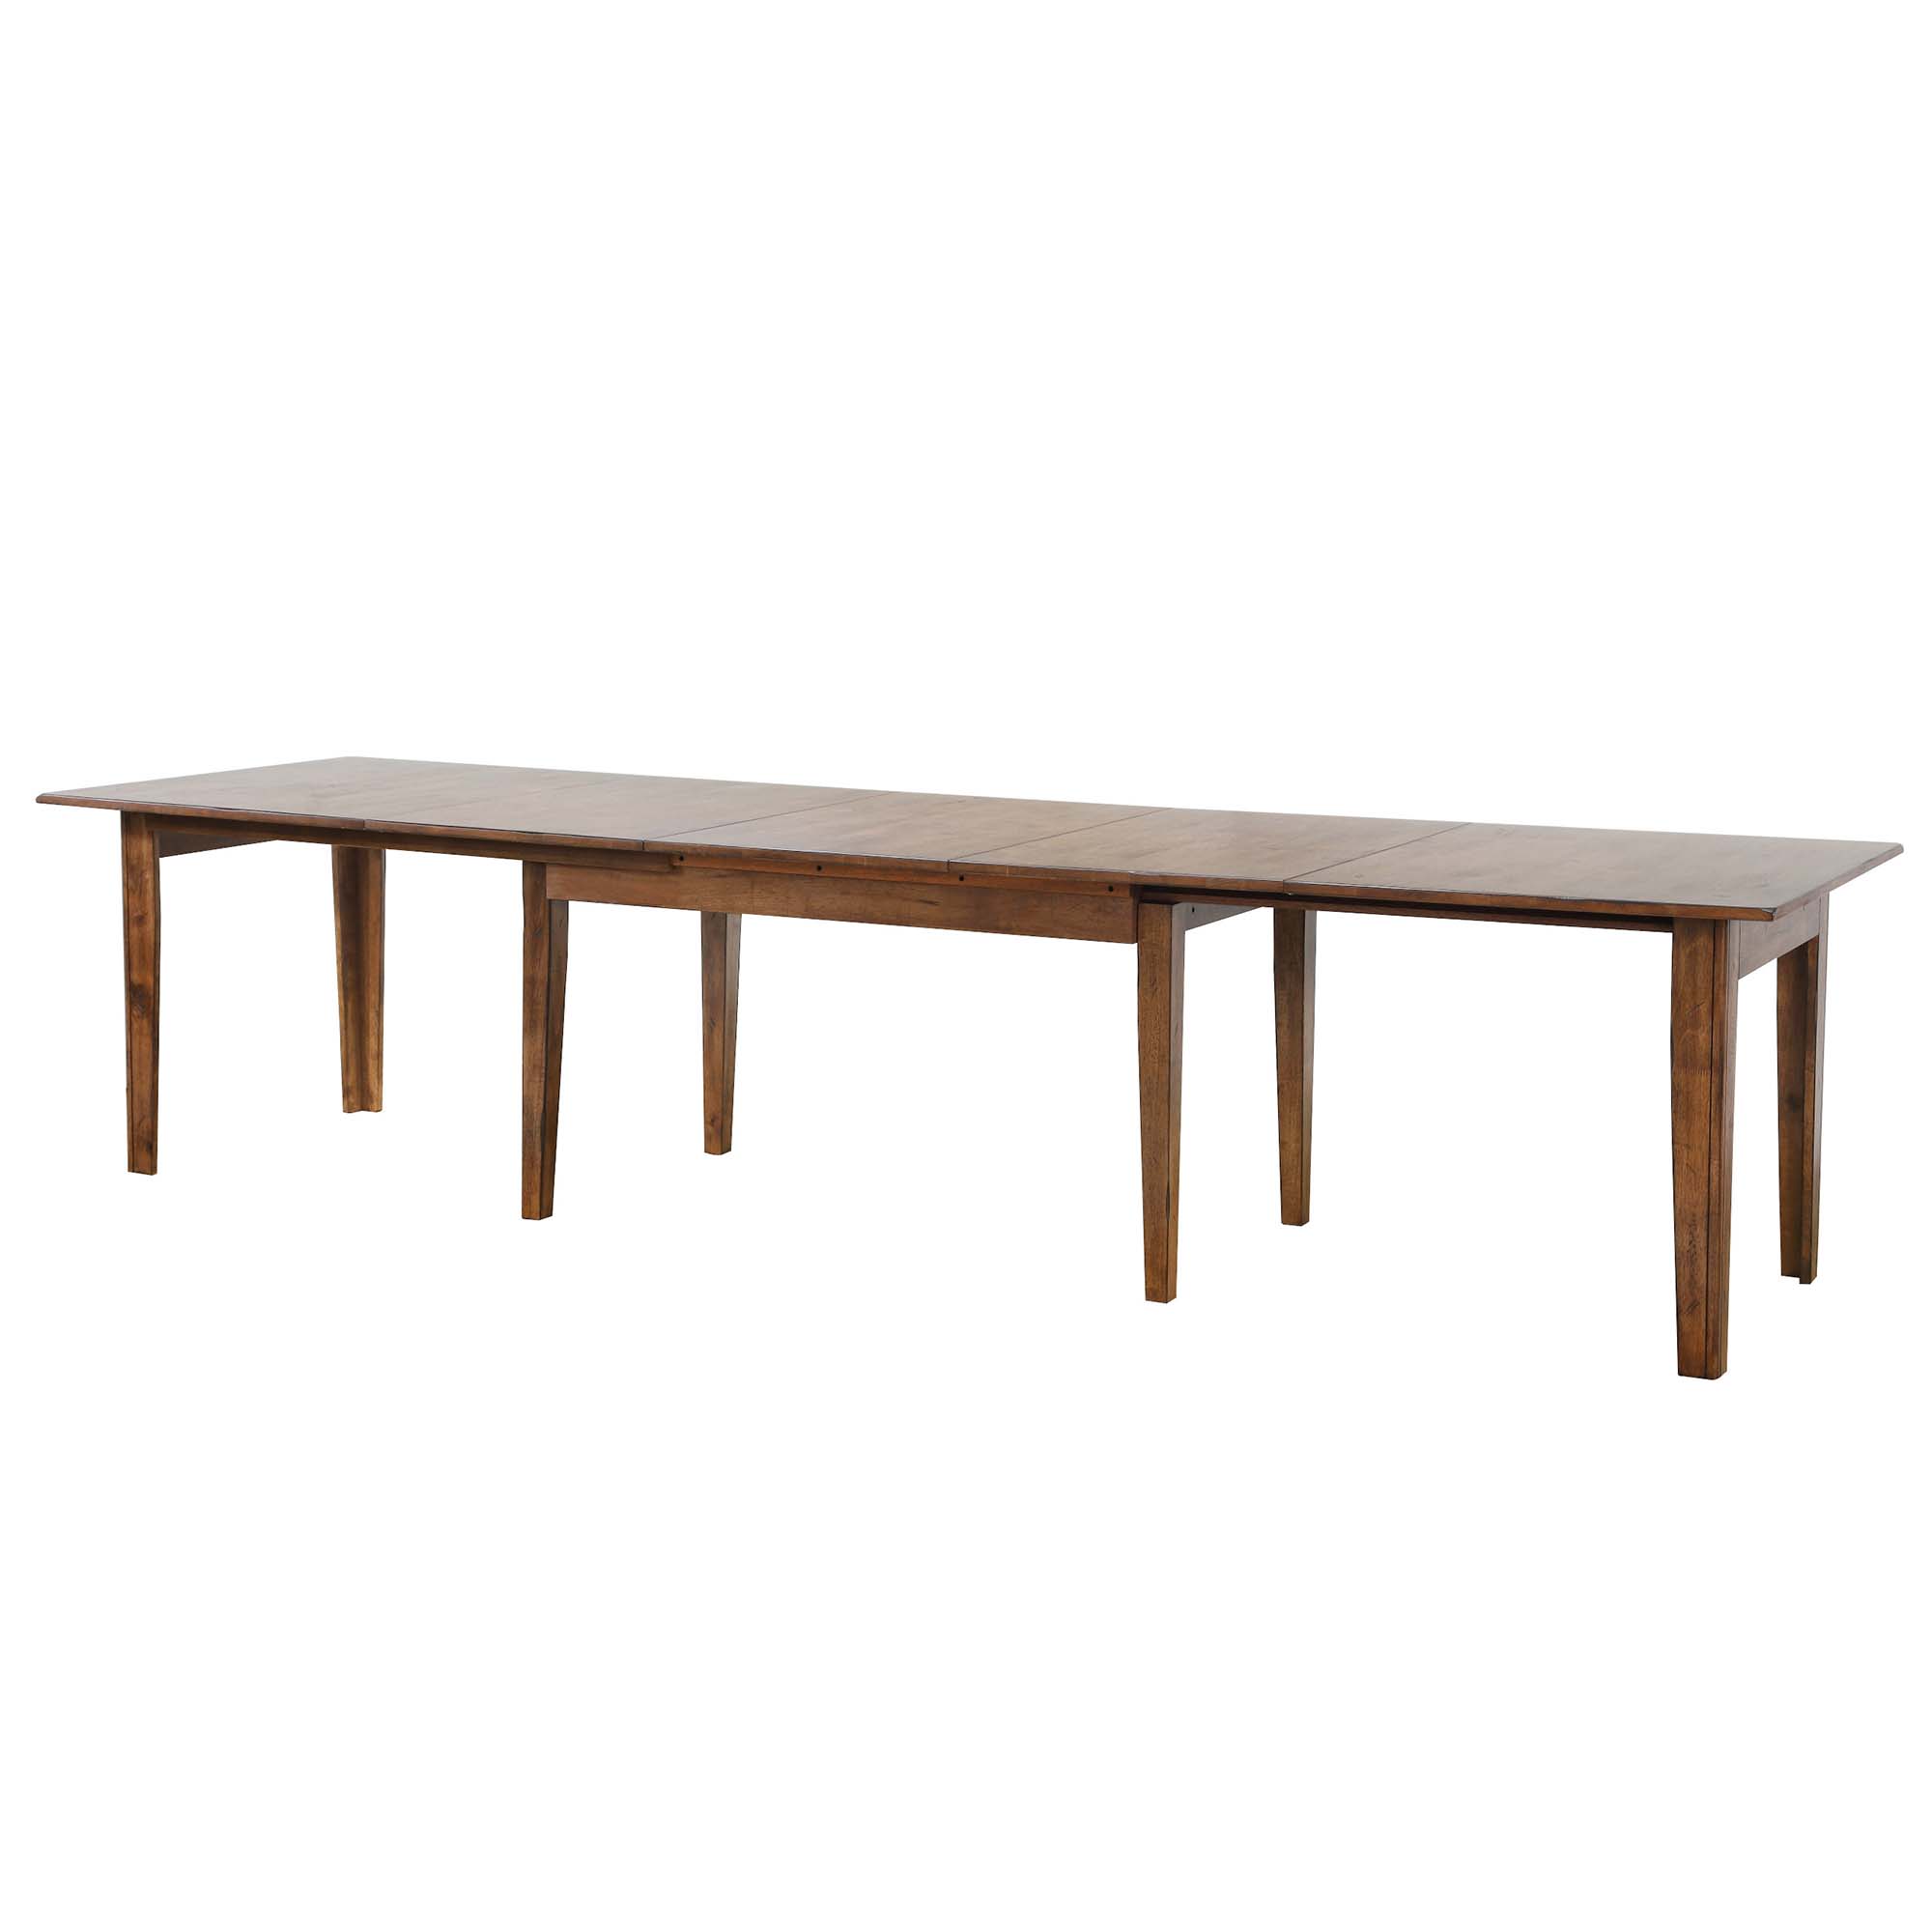 https://www.sunsettrading.com/wp-content/uploads/2021/05/Amish-Dining-Rectangular-extendable-dining-table-fully-extended-DLU-BR134-AM.jpg